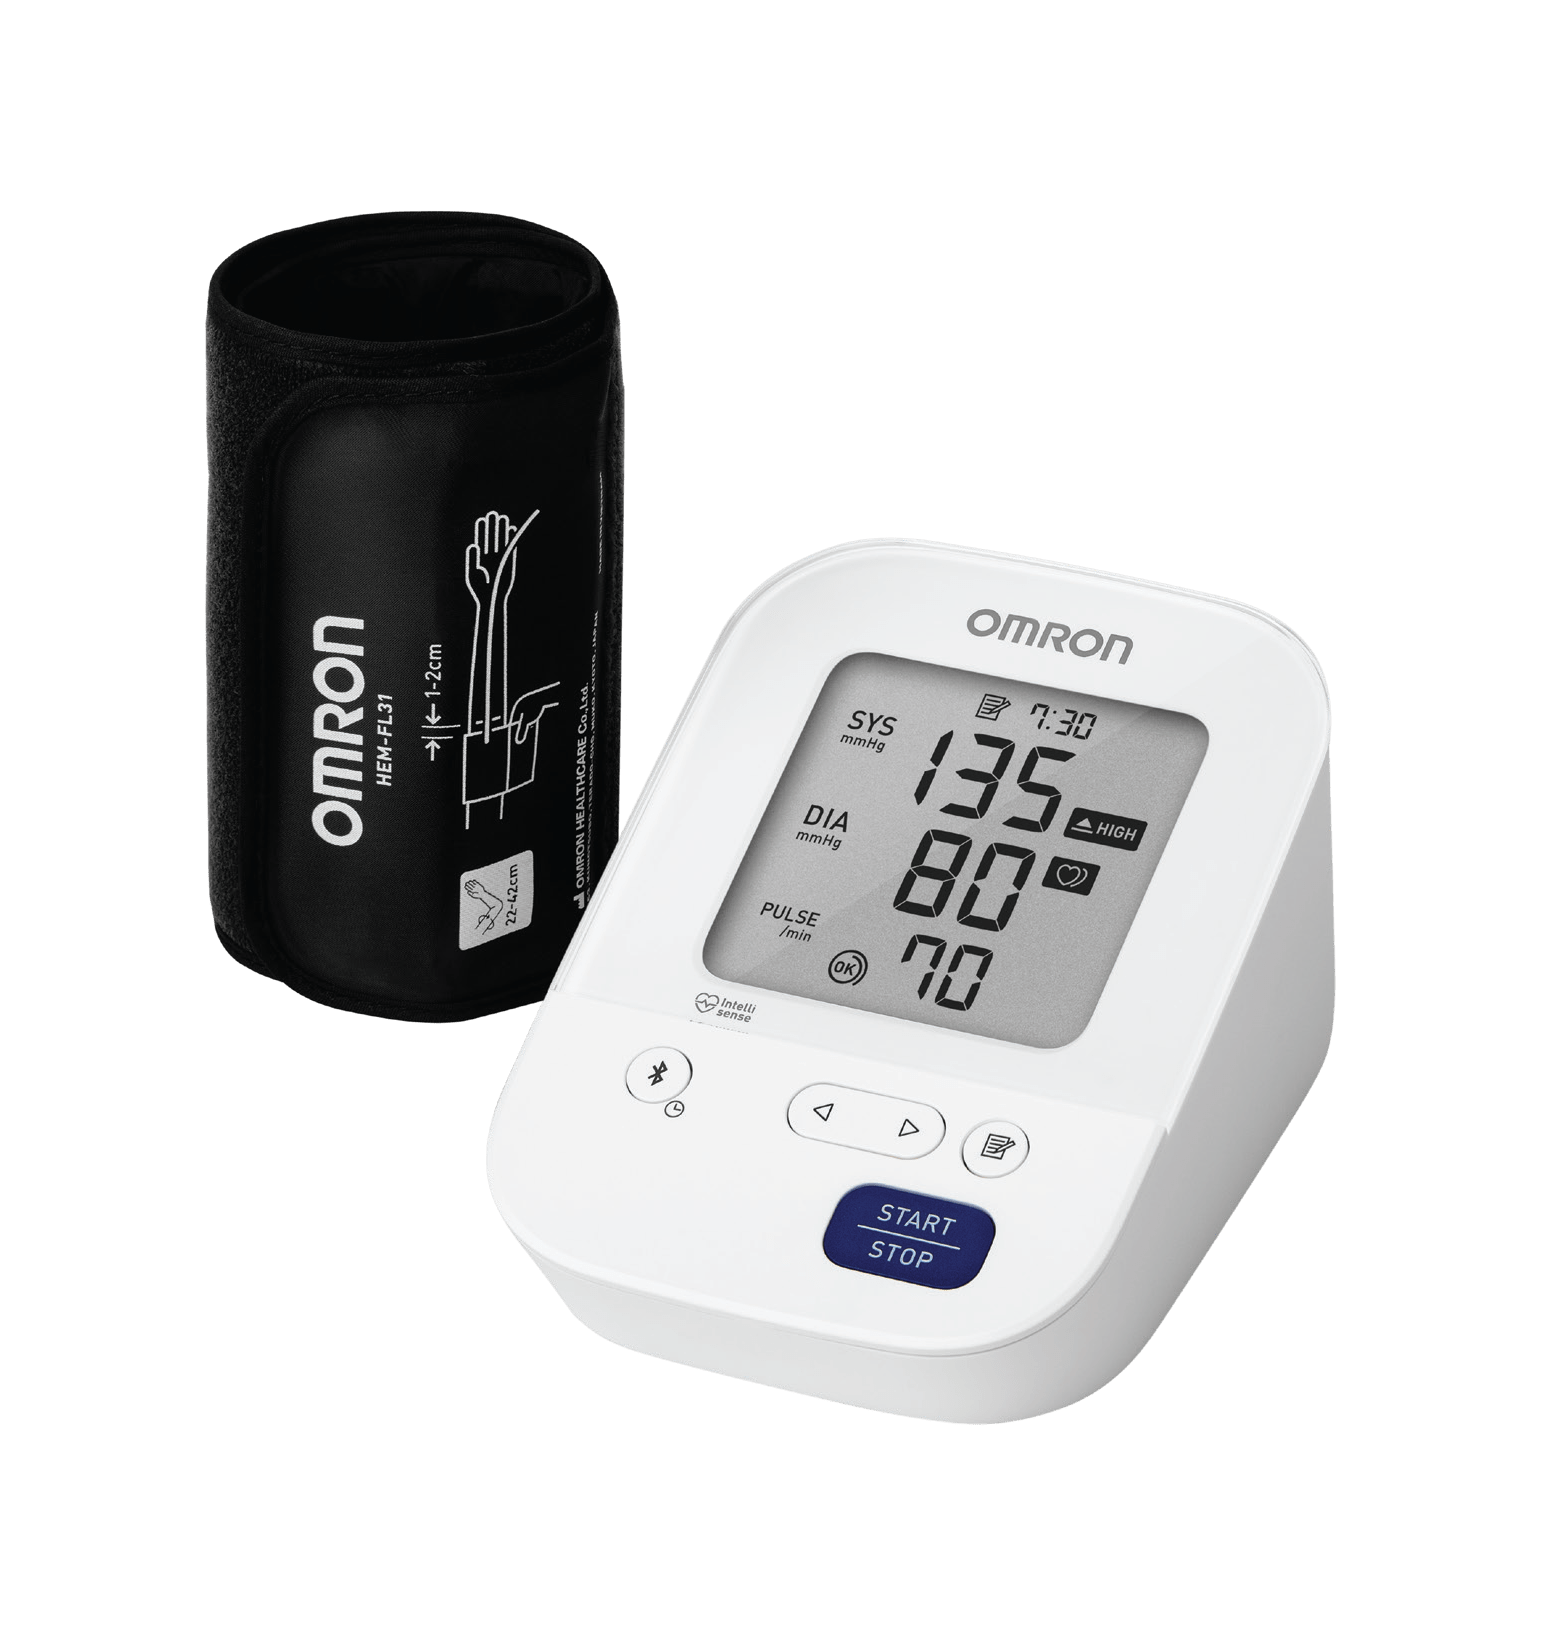 Best Blood Pressure Monitors for Home Use